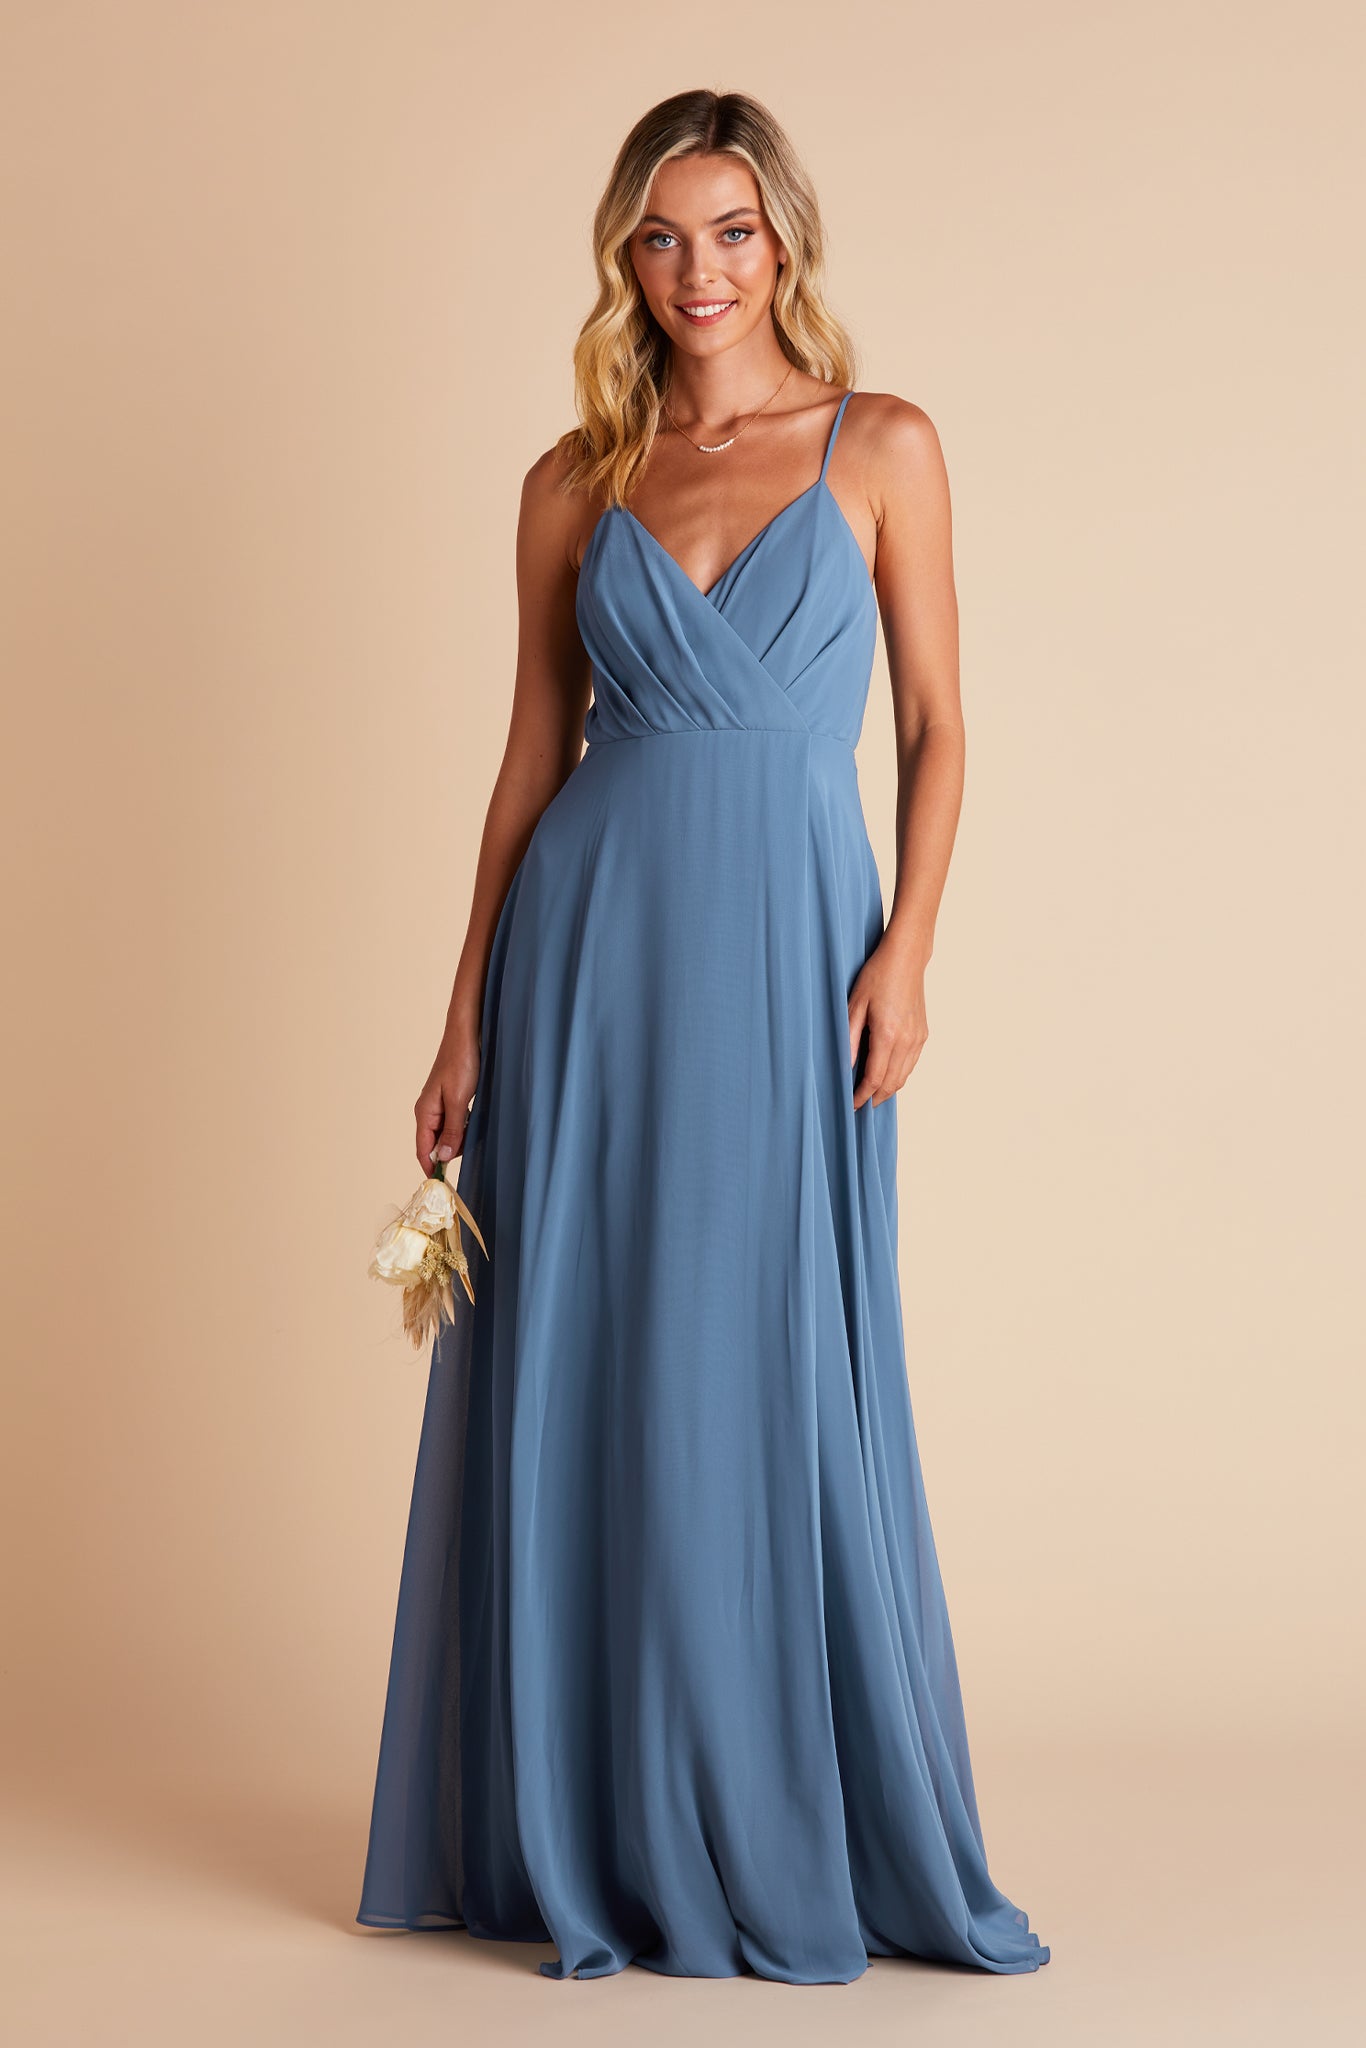 Kaia bridesmaids dress in twilight blue chiffon by Birdy Grey, front view